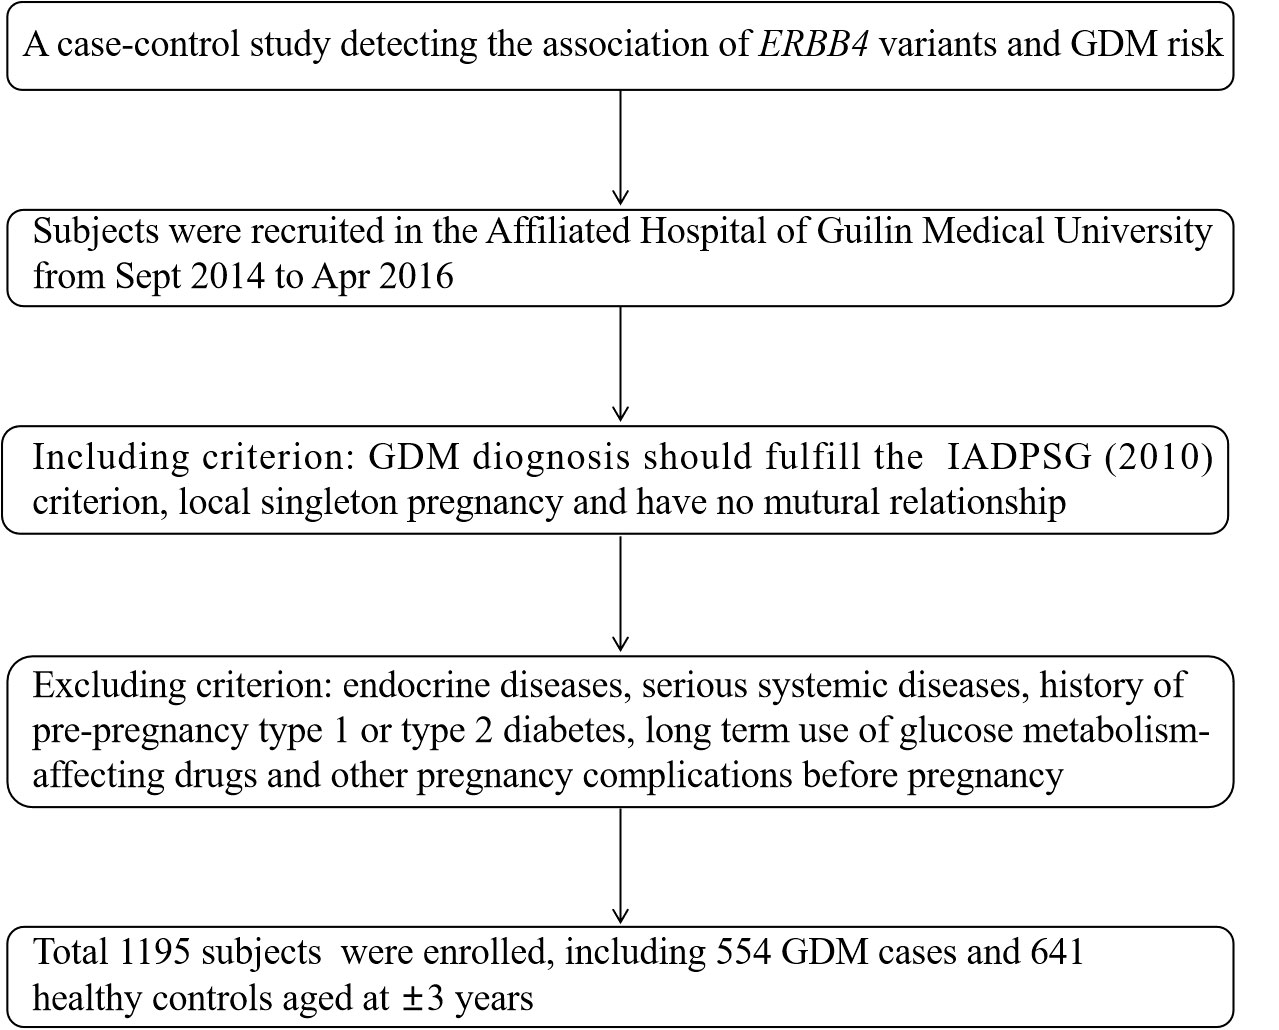 Importance of pre-pregnancy care for women with diabetes: A case